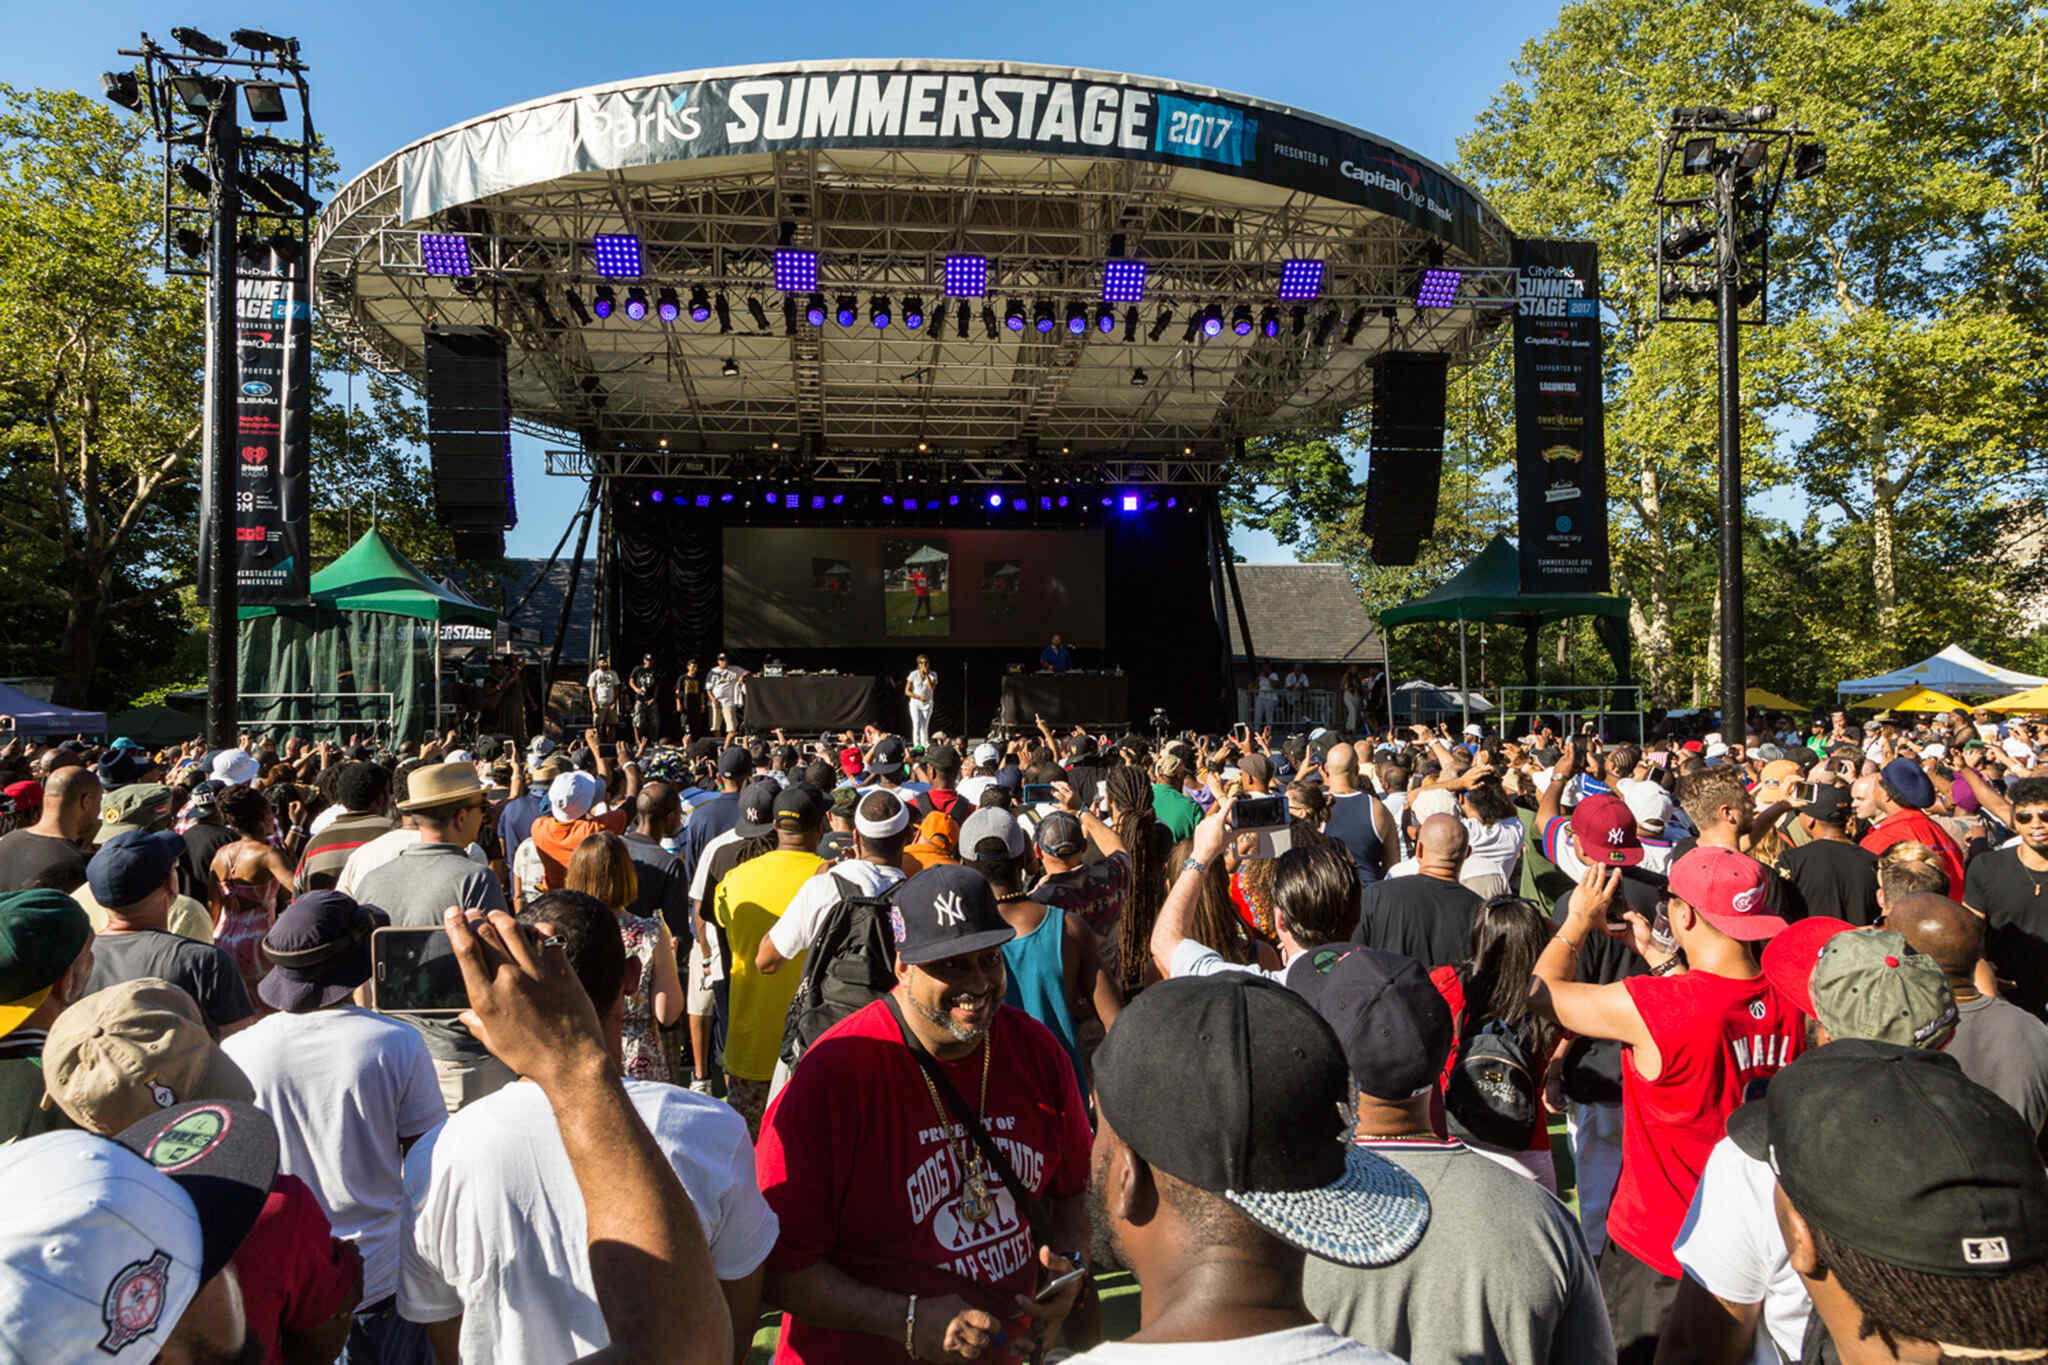 18 Facts About Central Park SummerStage - Facts.net